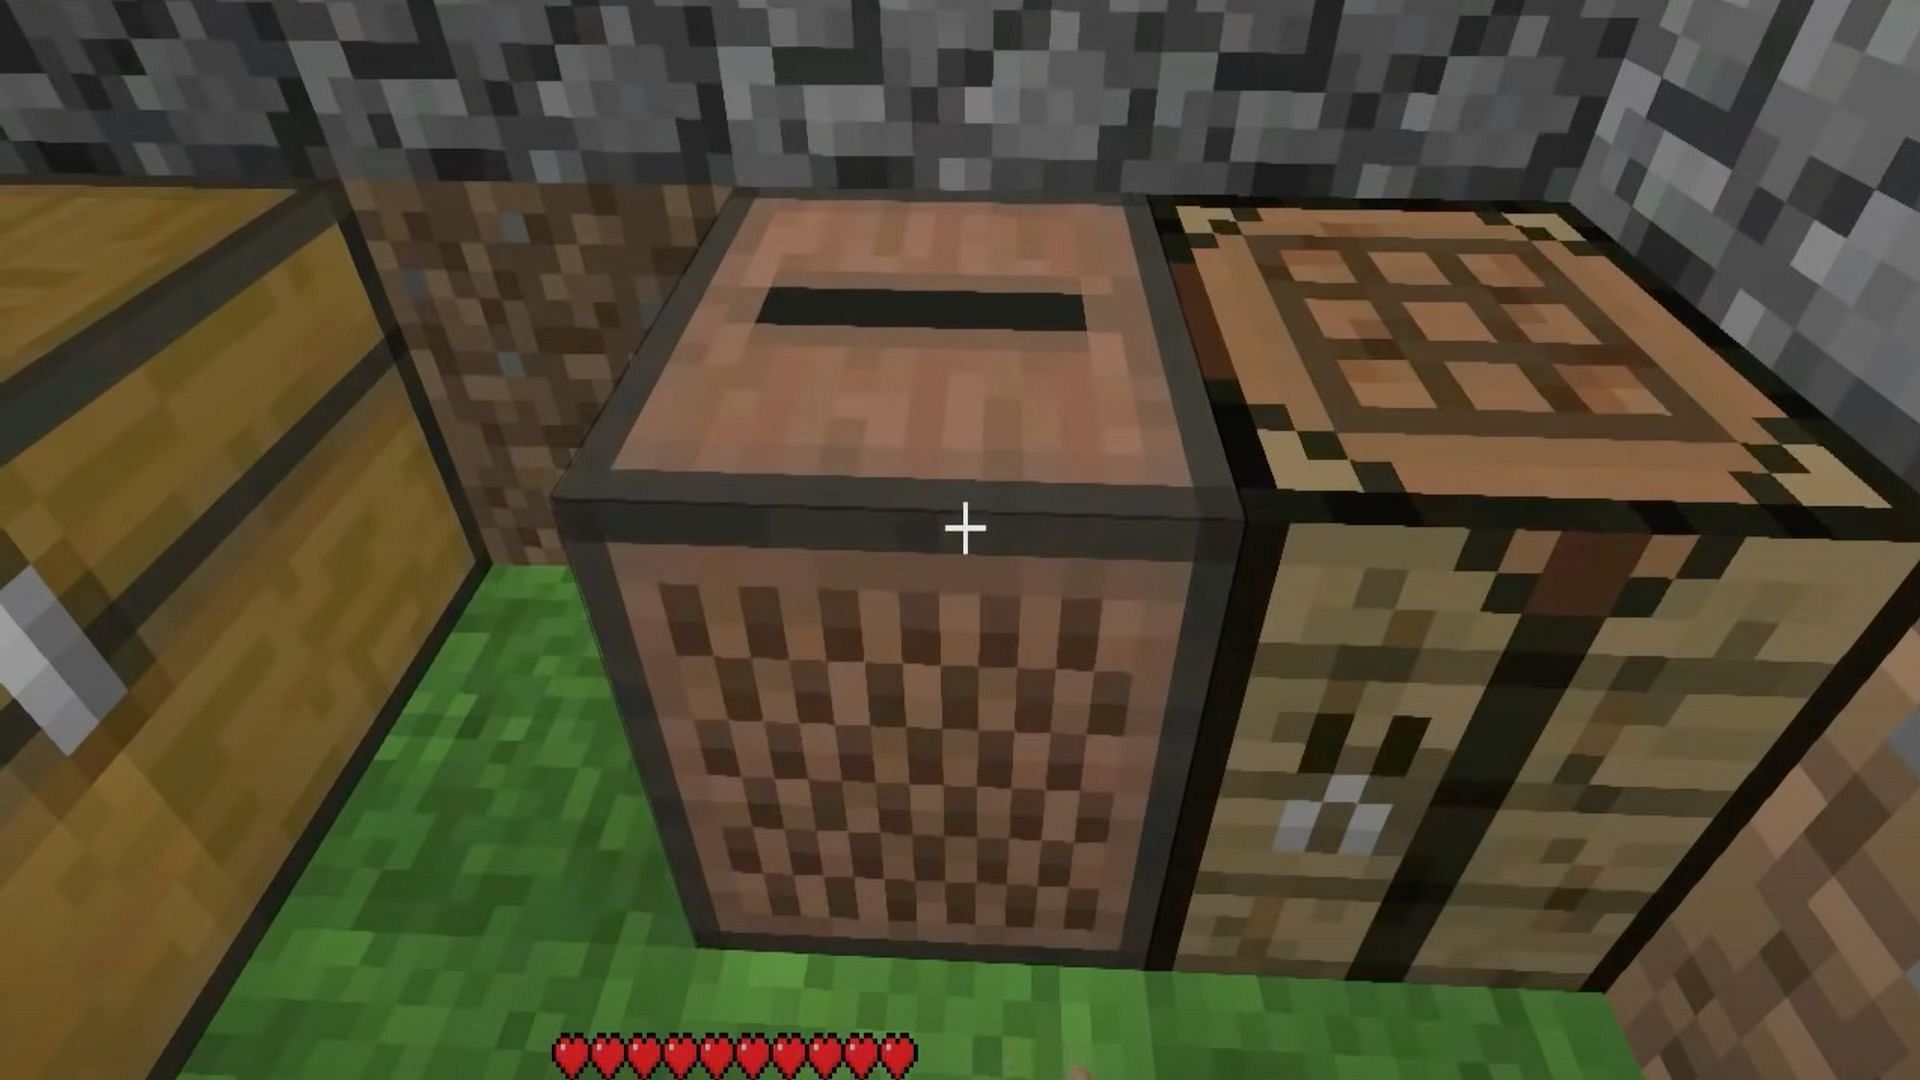 How To Make A Jukebox In Minecraft 1 18